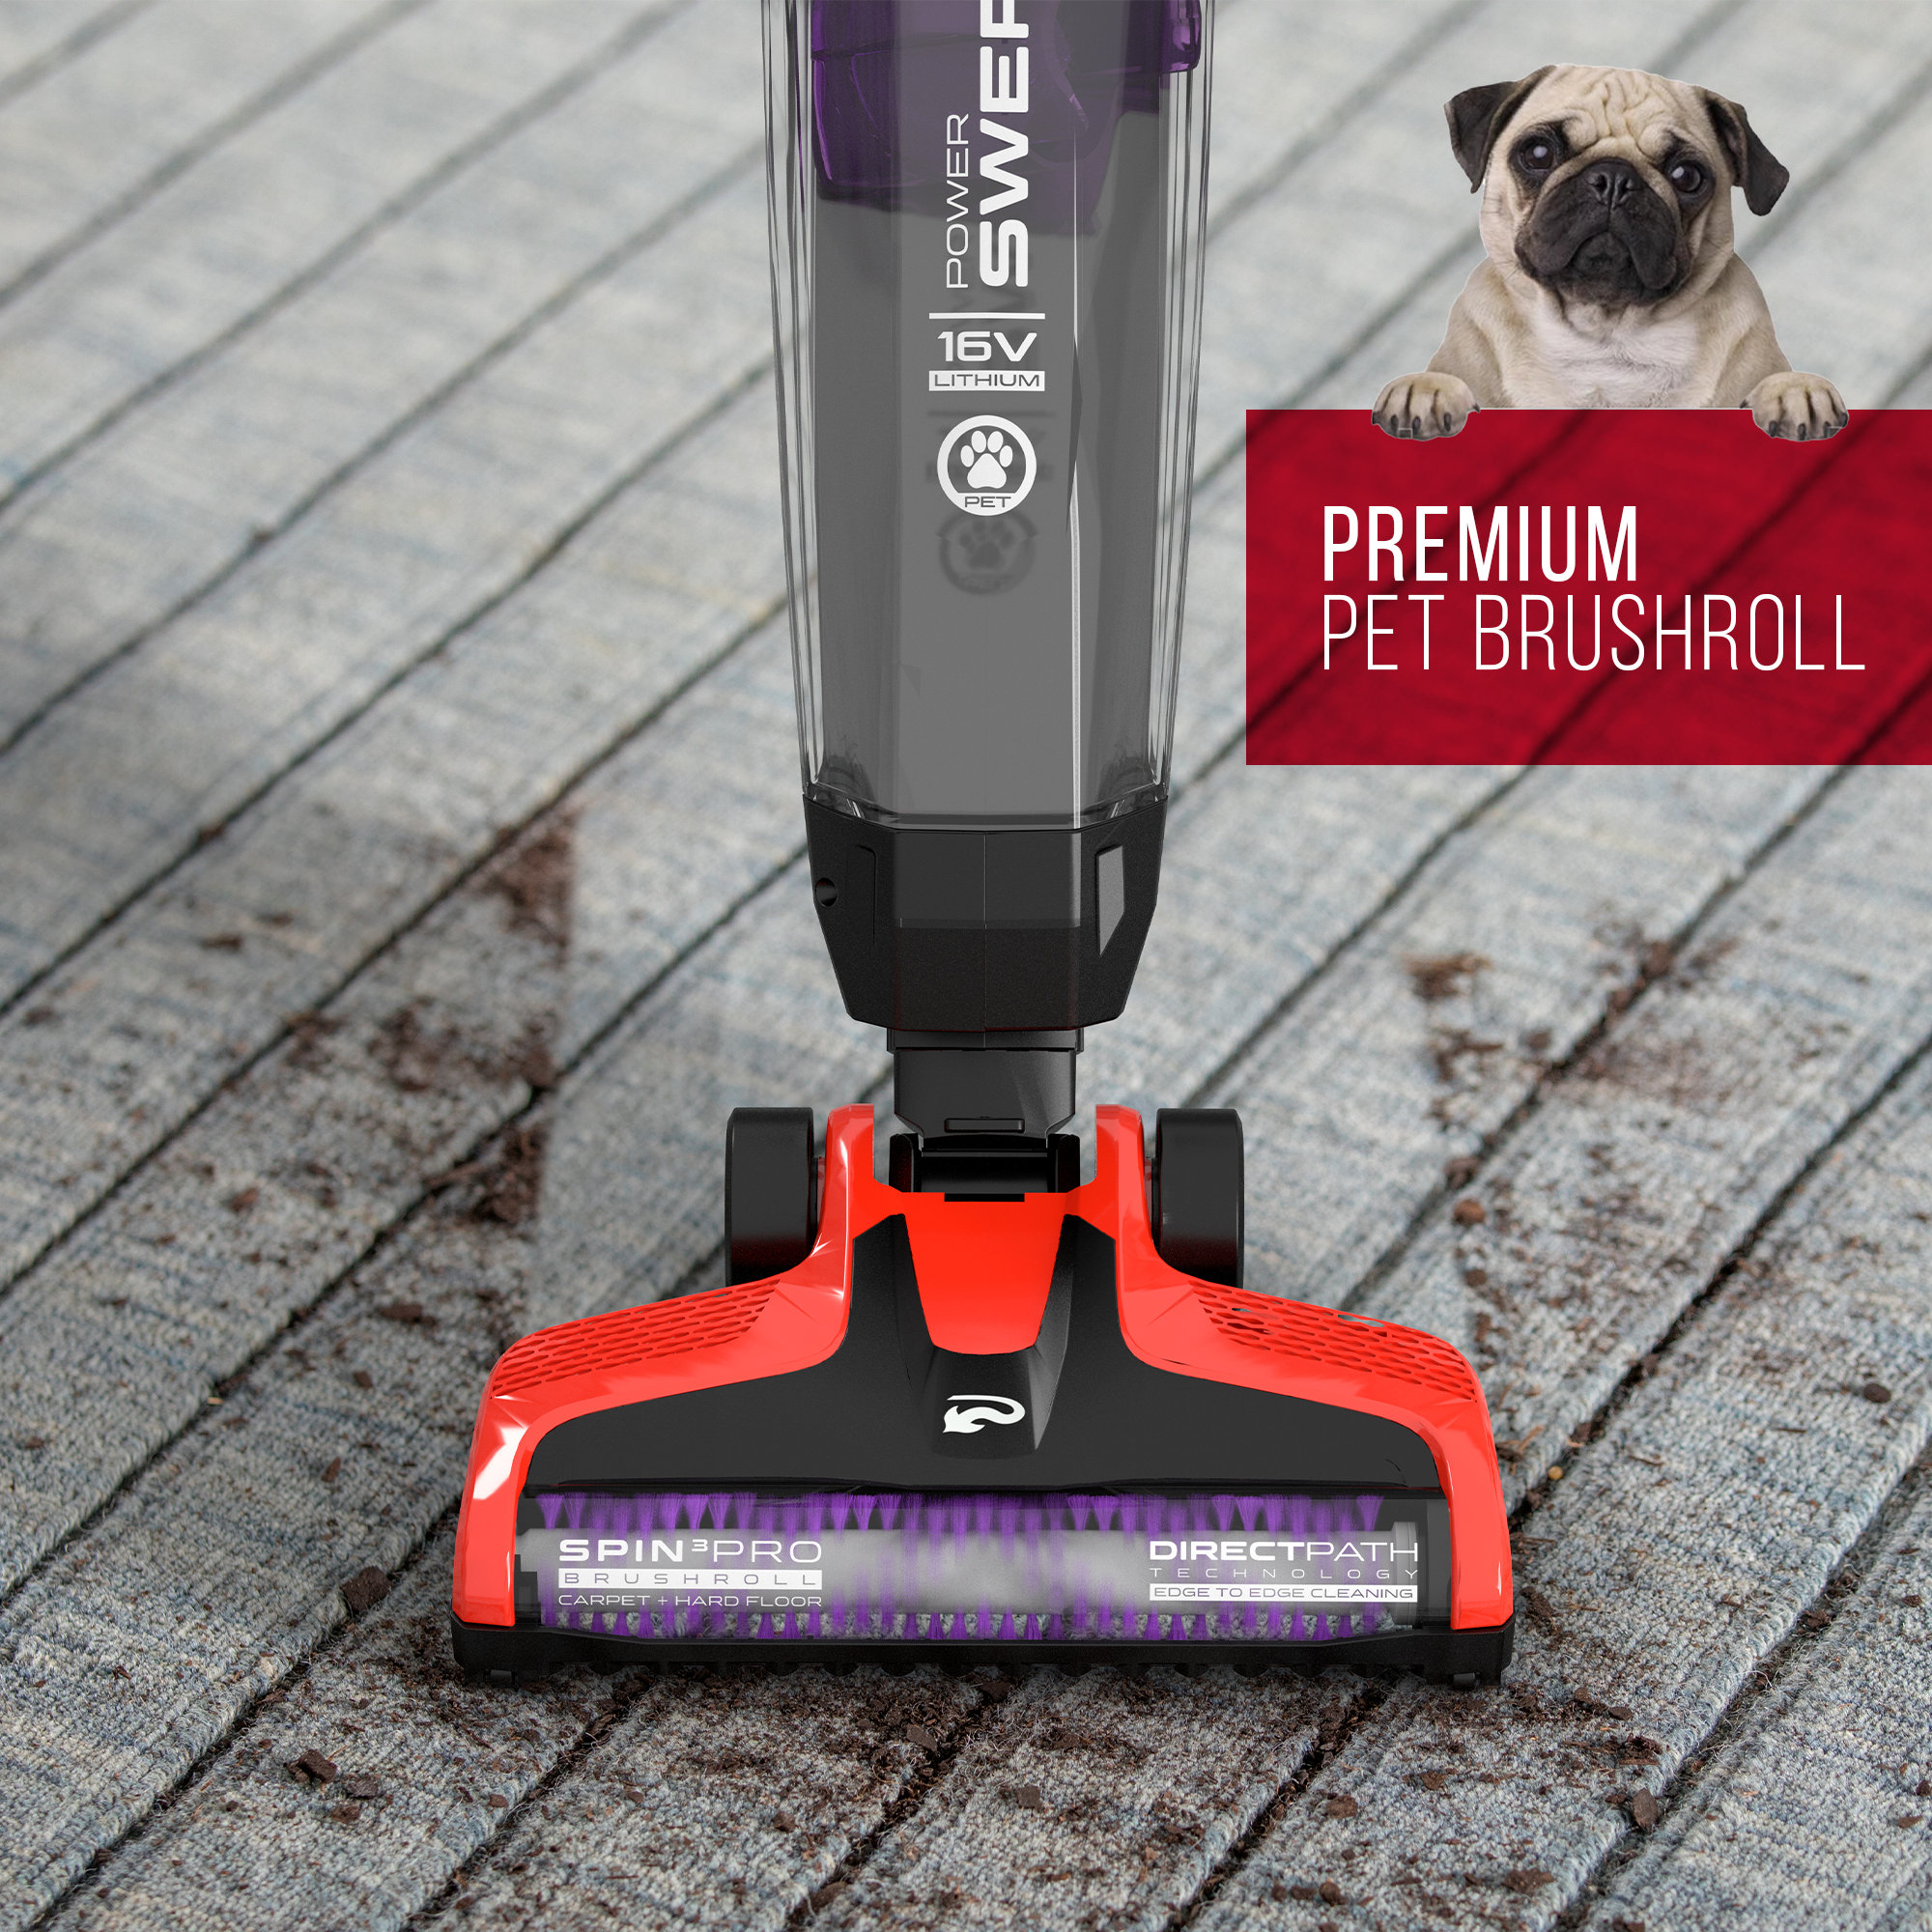 Eureka 5 in 1 Cordless Stick Vacuum Cleaner Ideal for Pet Family